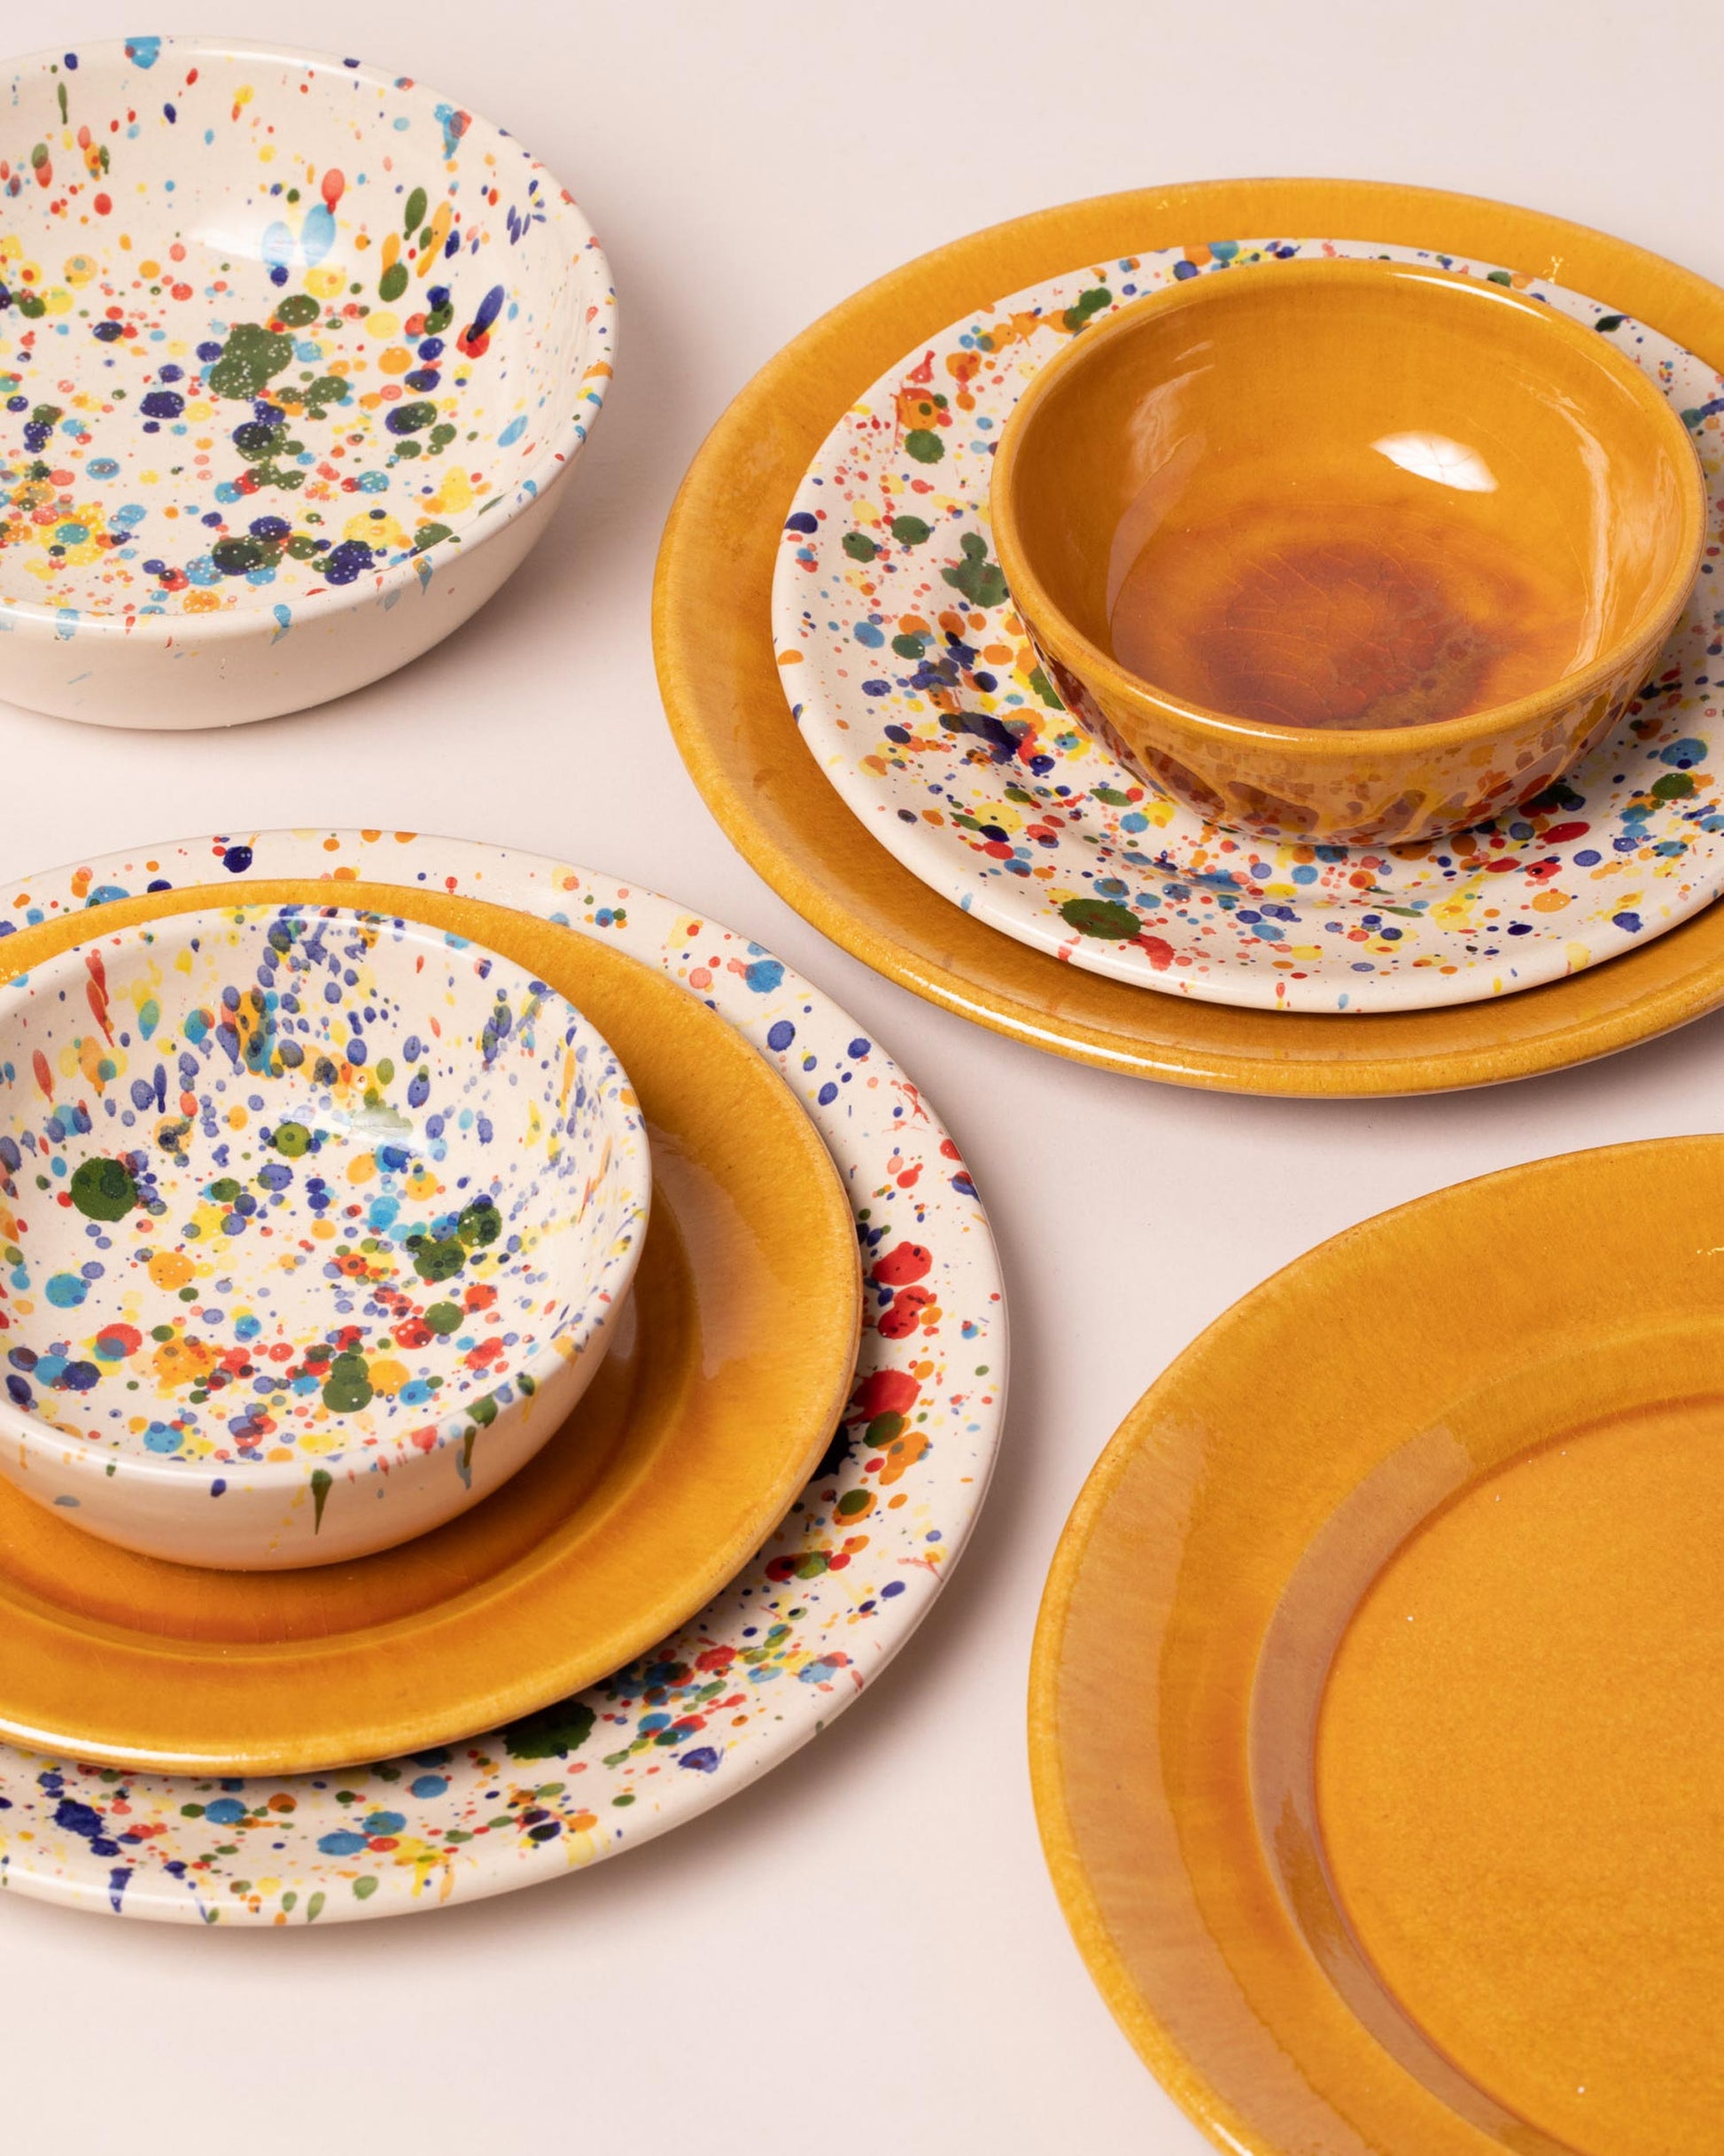 Closeup details of a group of Closeup details of the La Ceramica Vincenzo Del Monaco Caramel Yellow and Colored Drops Dessert Dishes on light color background.